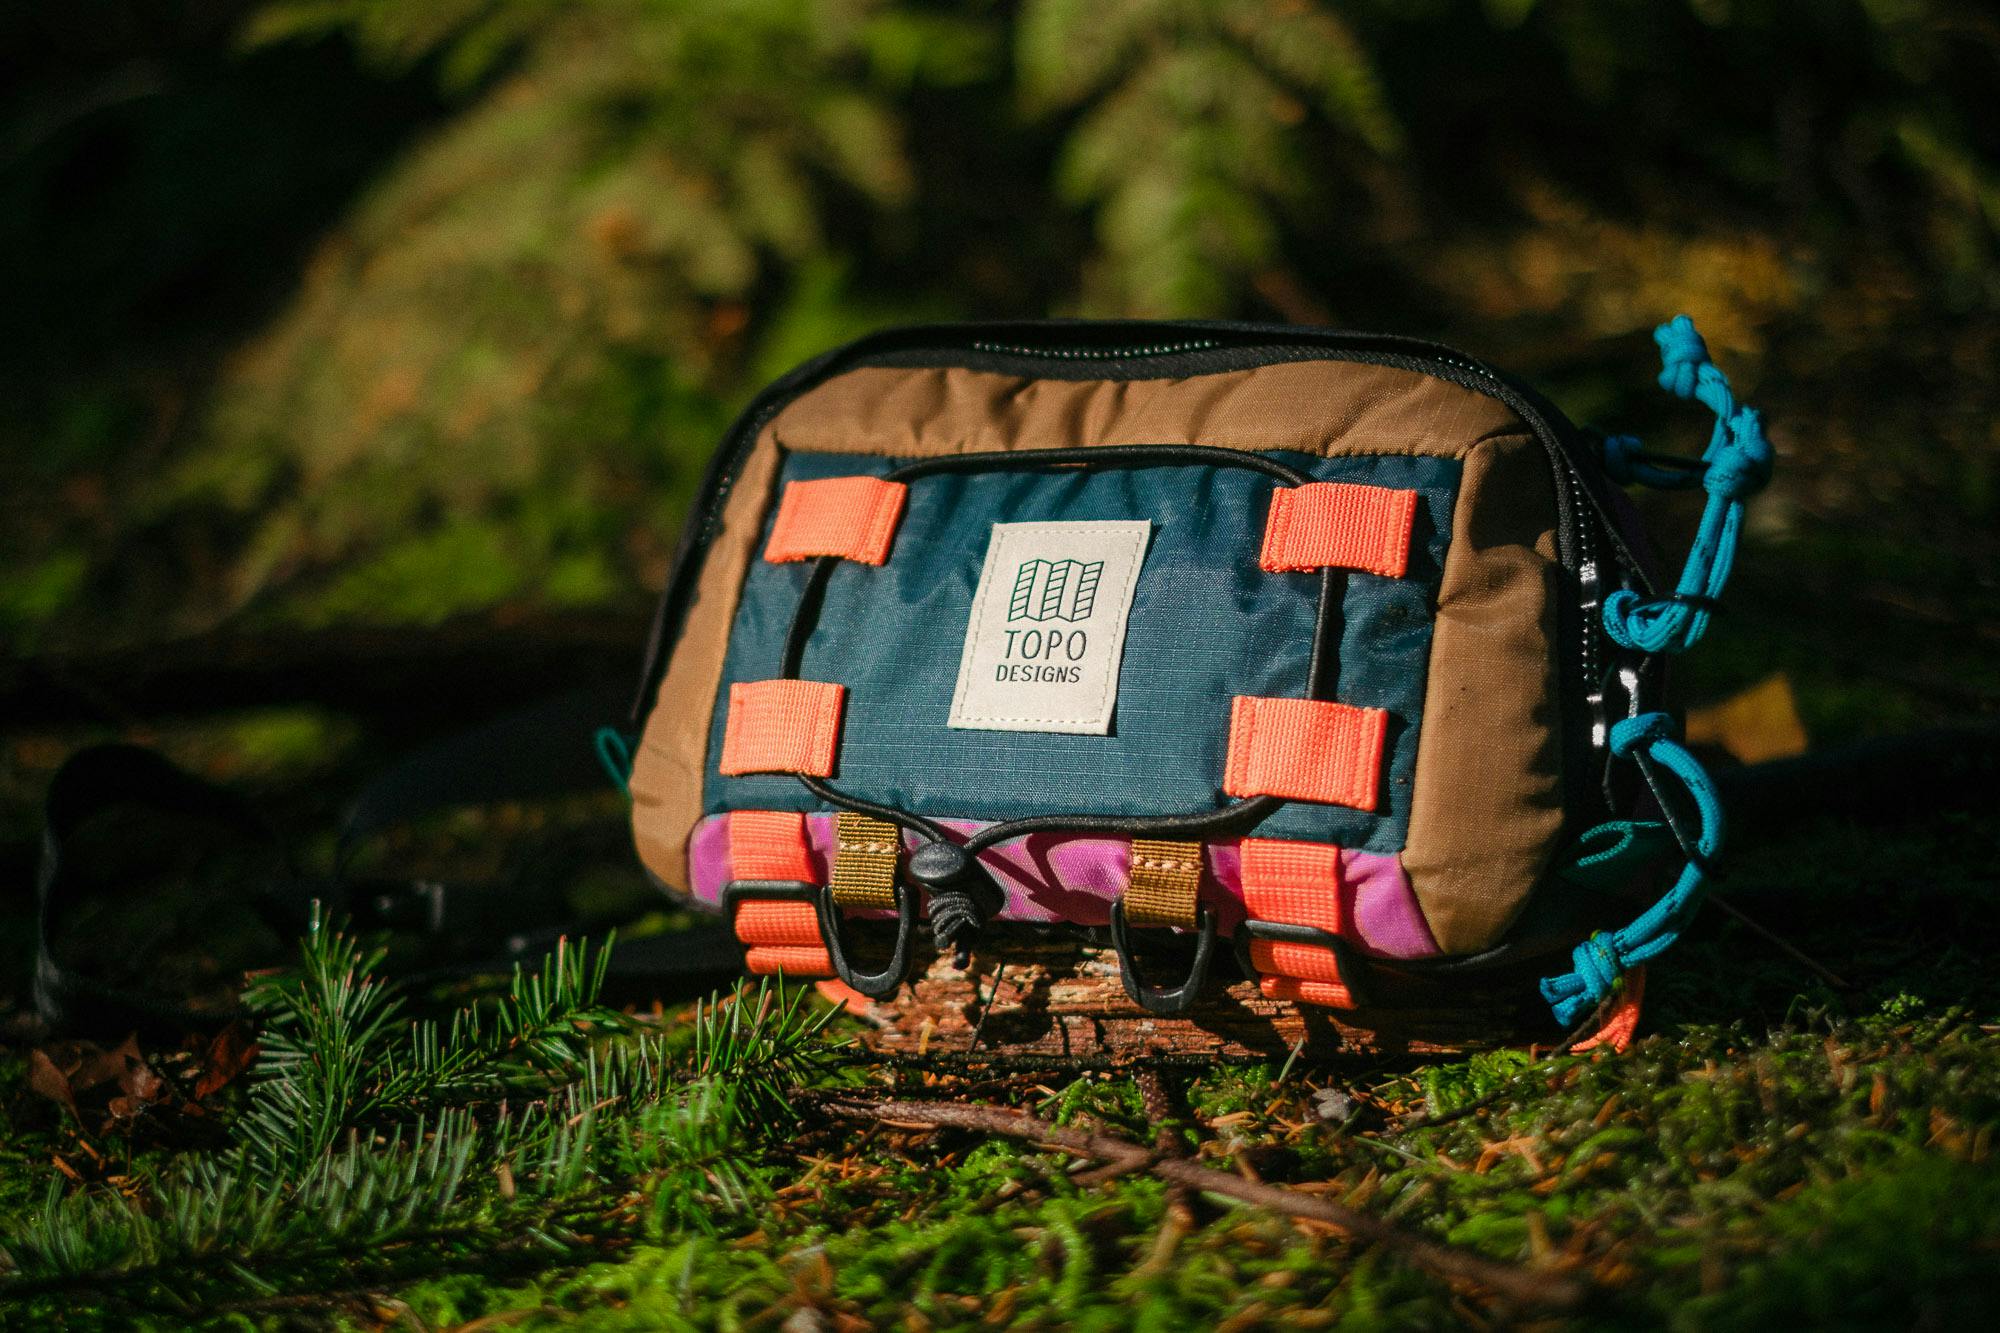 A hip pack waiting for its rider in the grass.